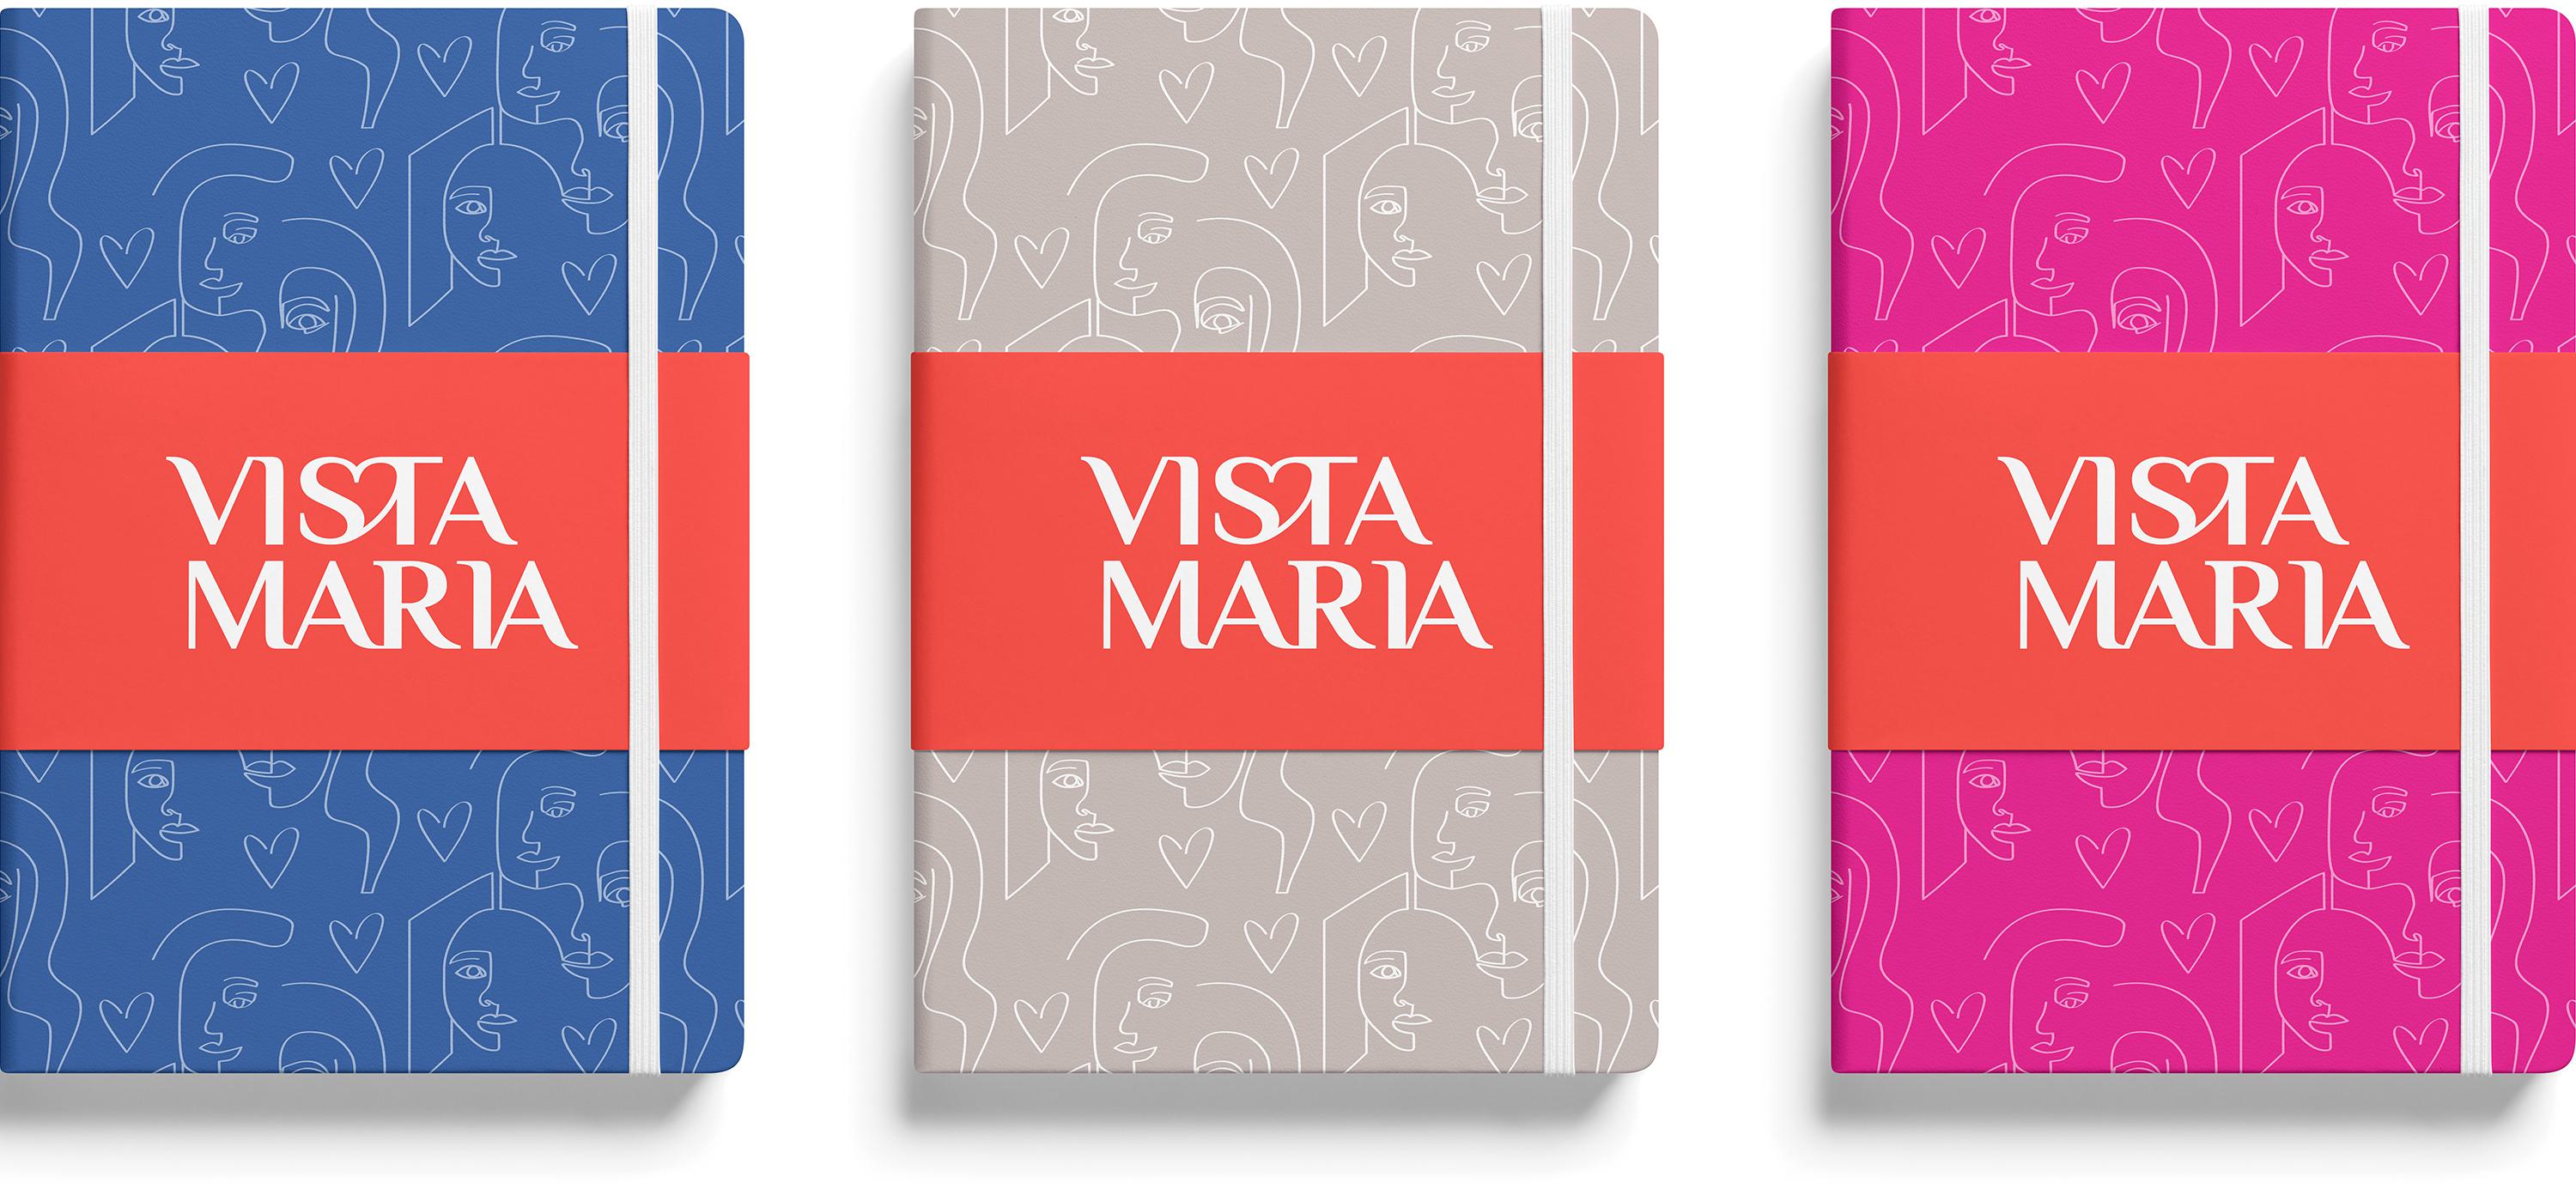 Three Vista Maria branded notebooks with blue, taupe and fuchsia covers.